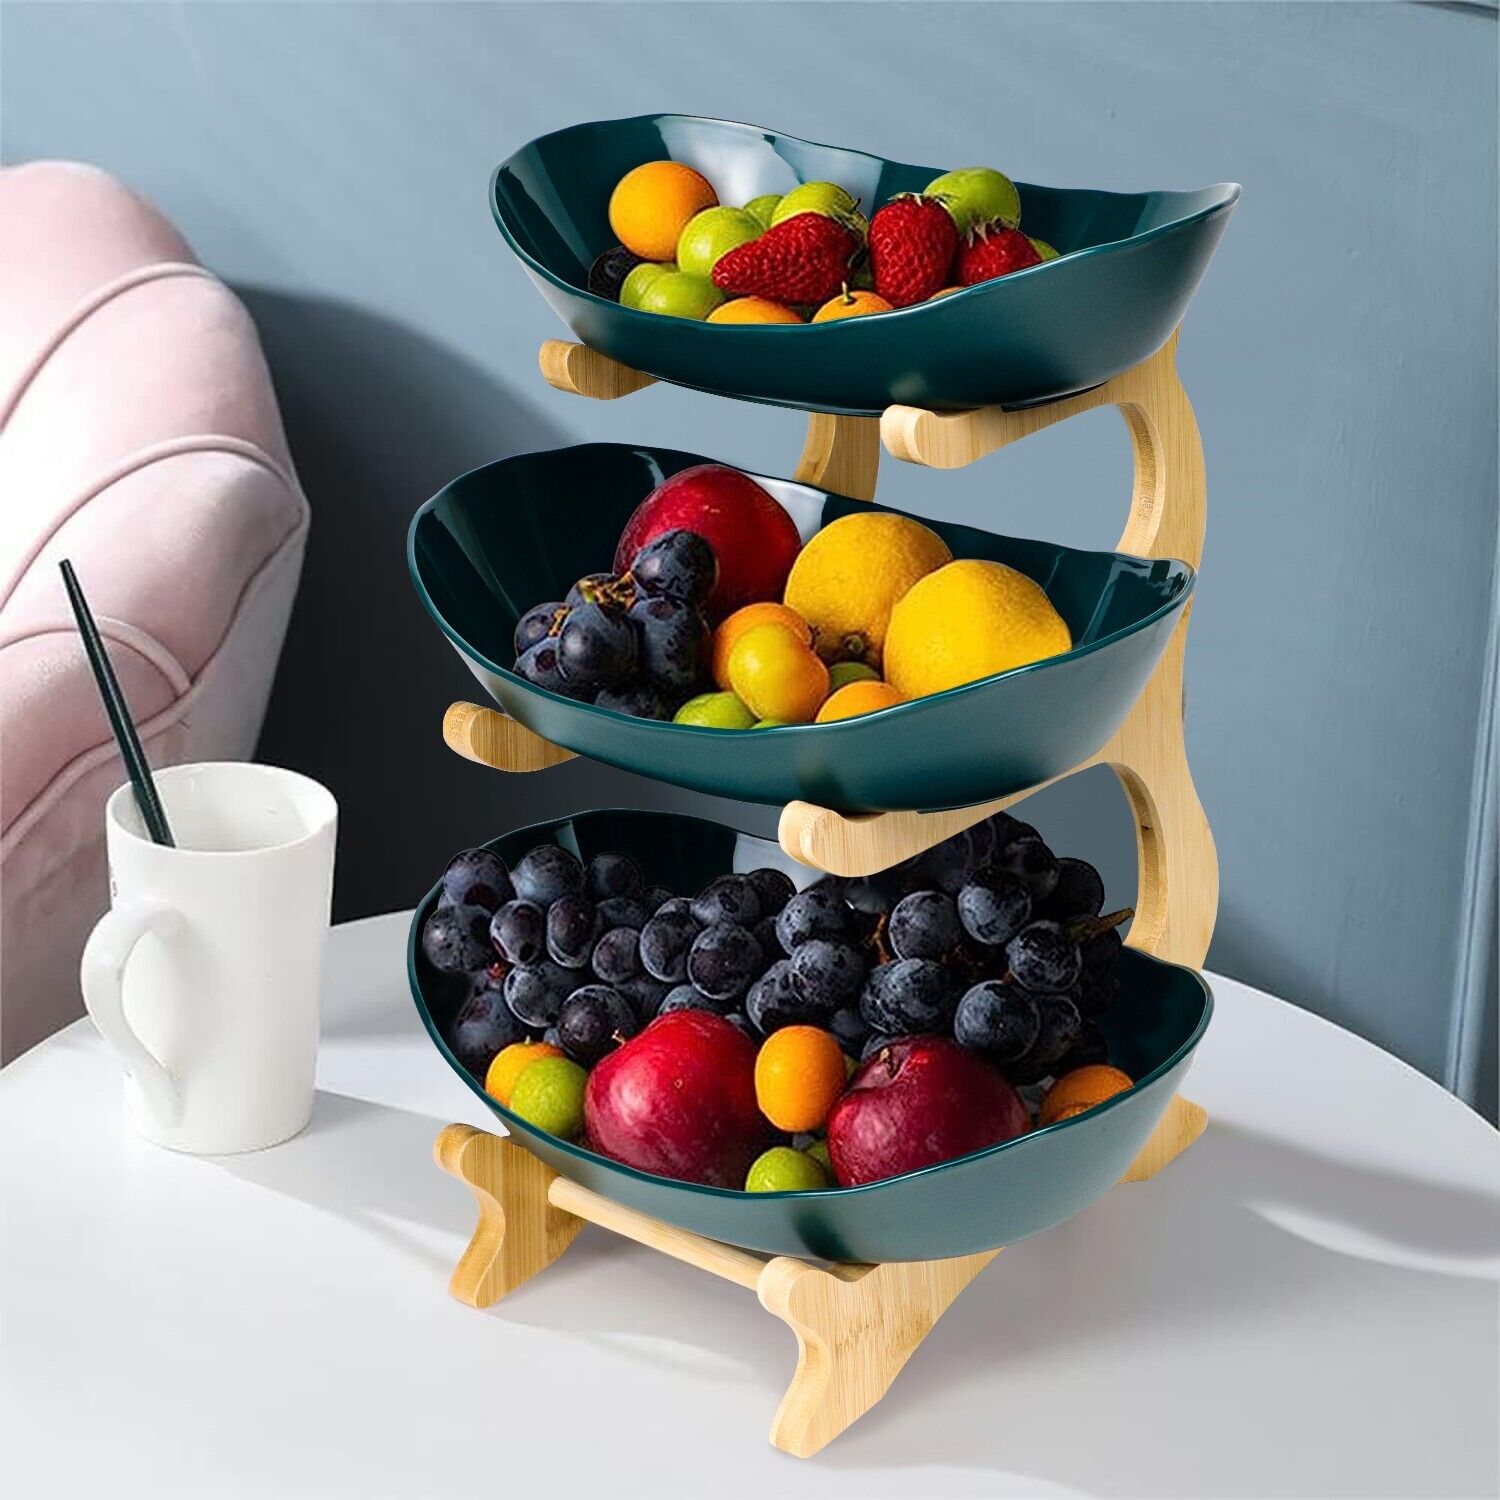 Table Plates 3 Tier  Dinnerware Set with Wooden Fruit Bowl plastic  and Trays